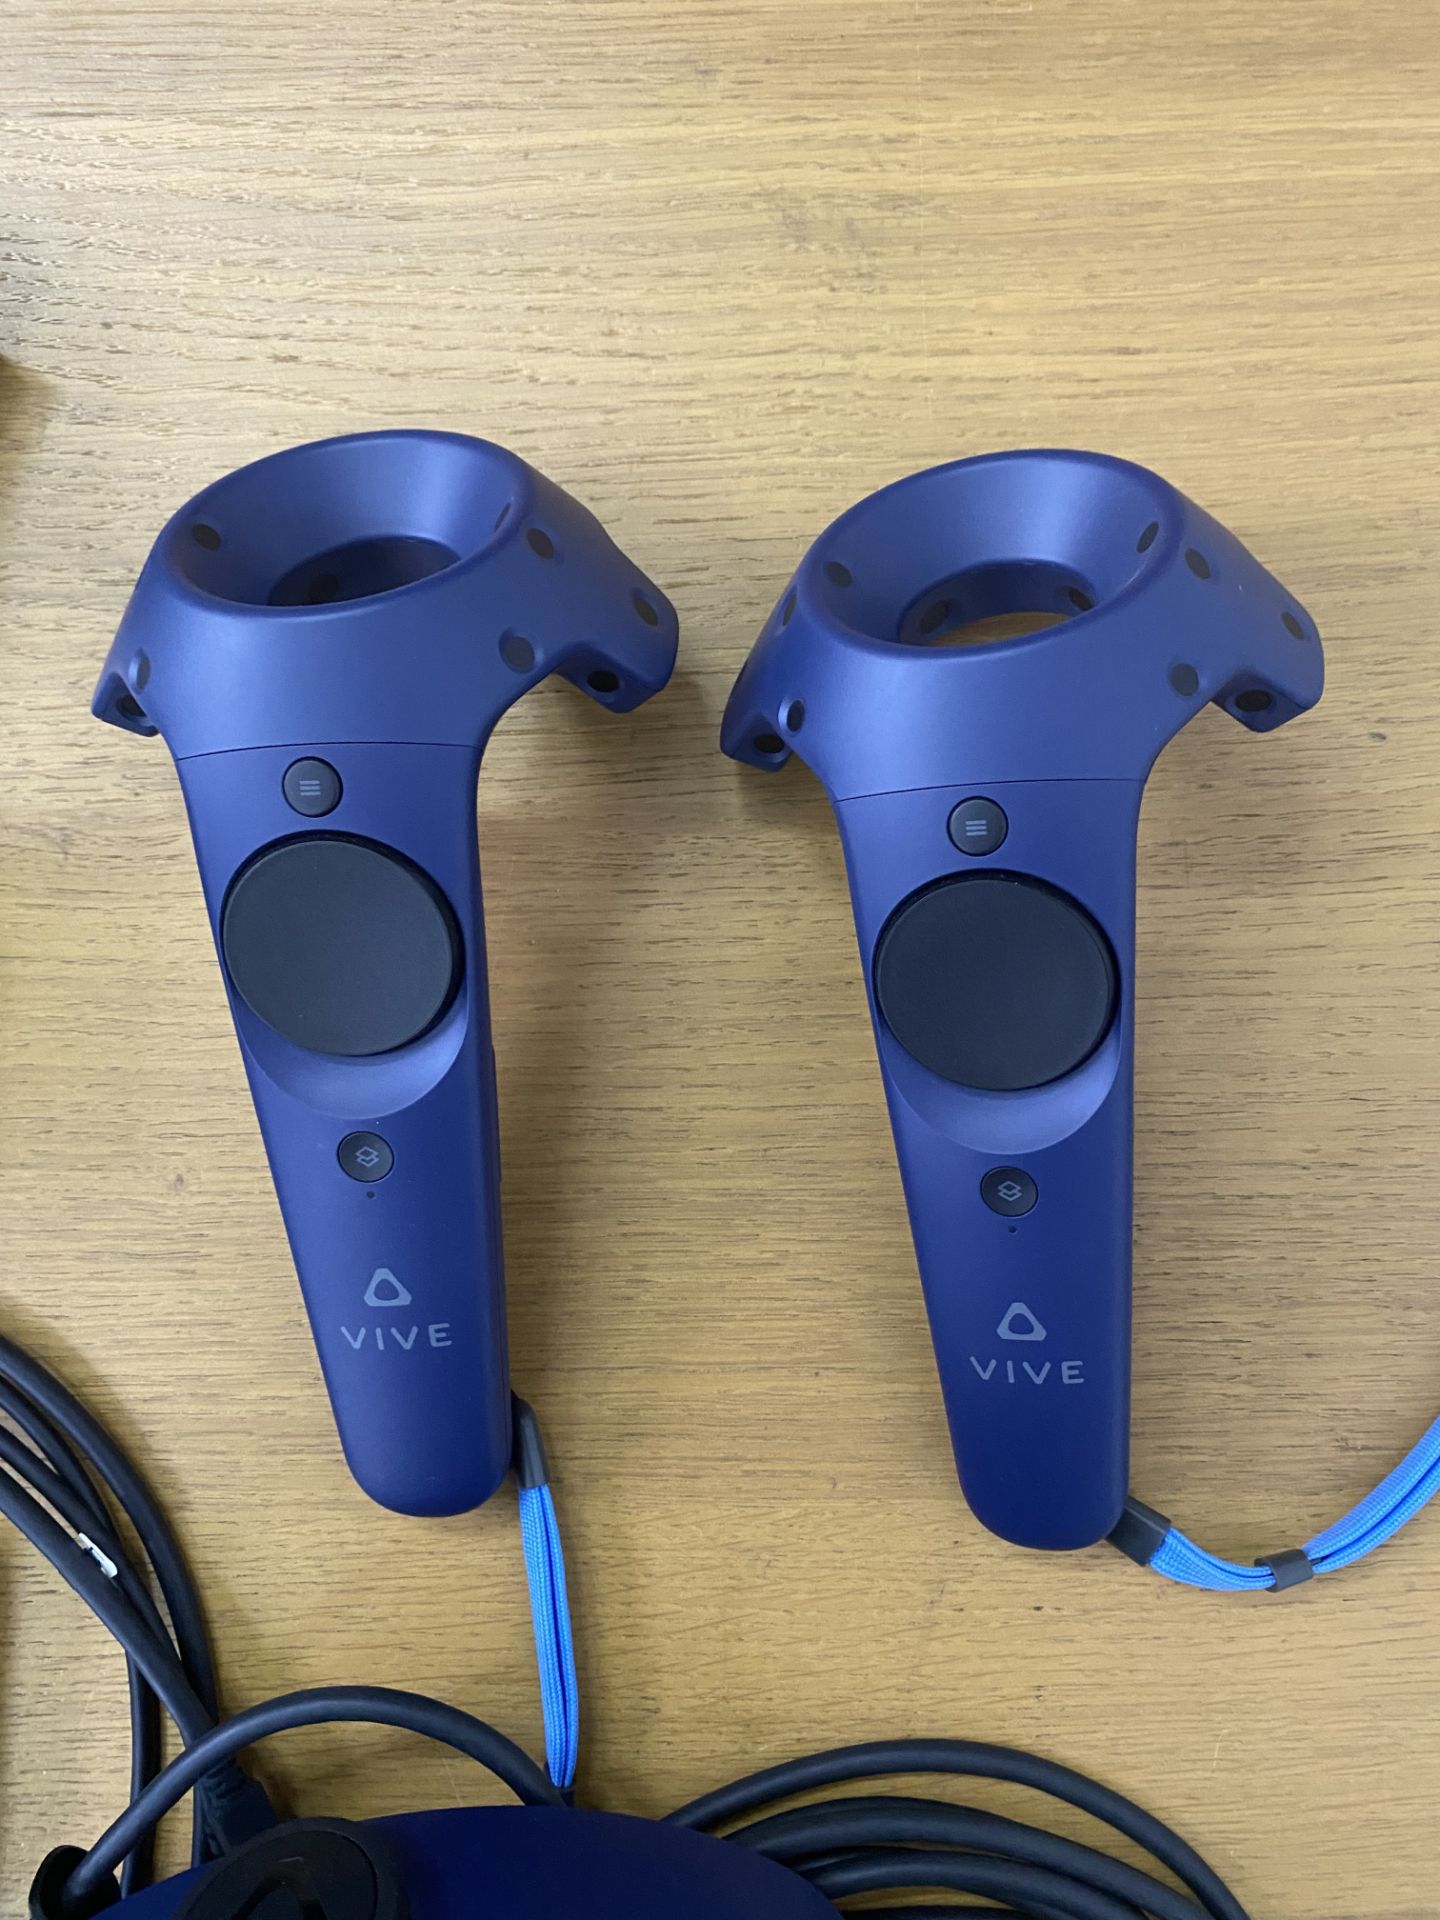 HTC Vive Pro 2 VR Headset - Image 5 of 9